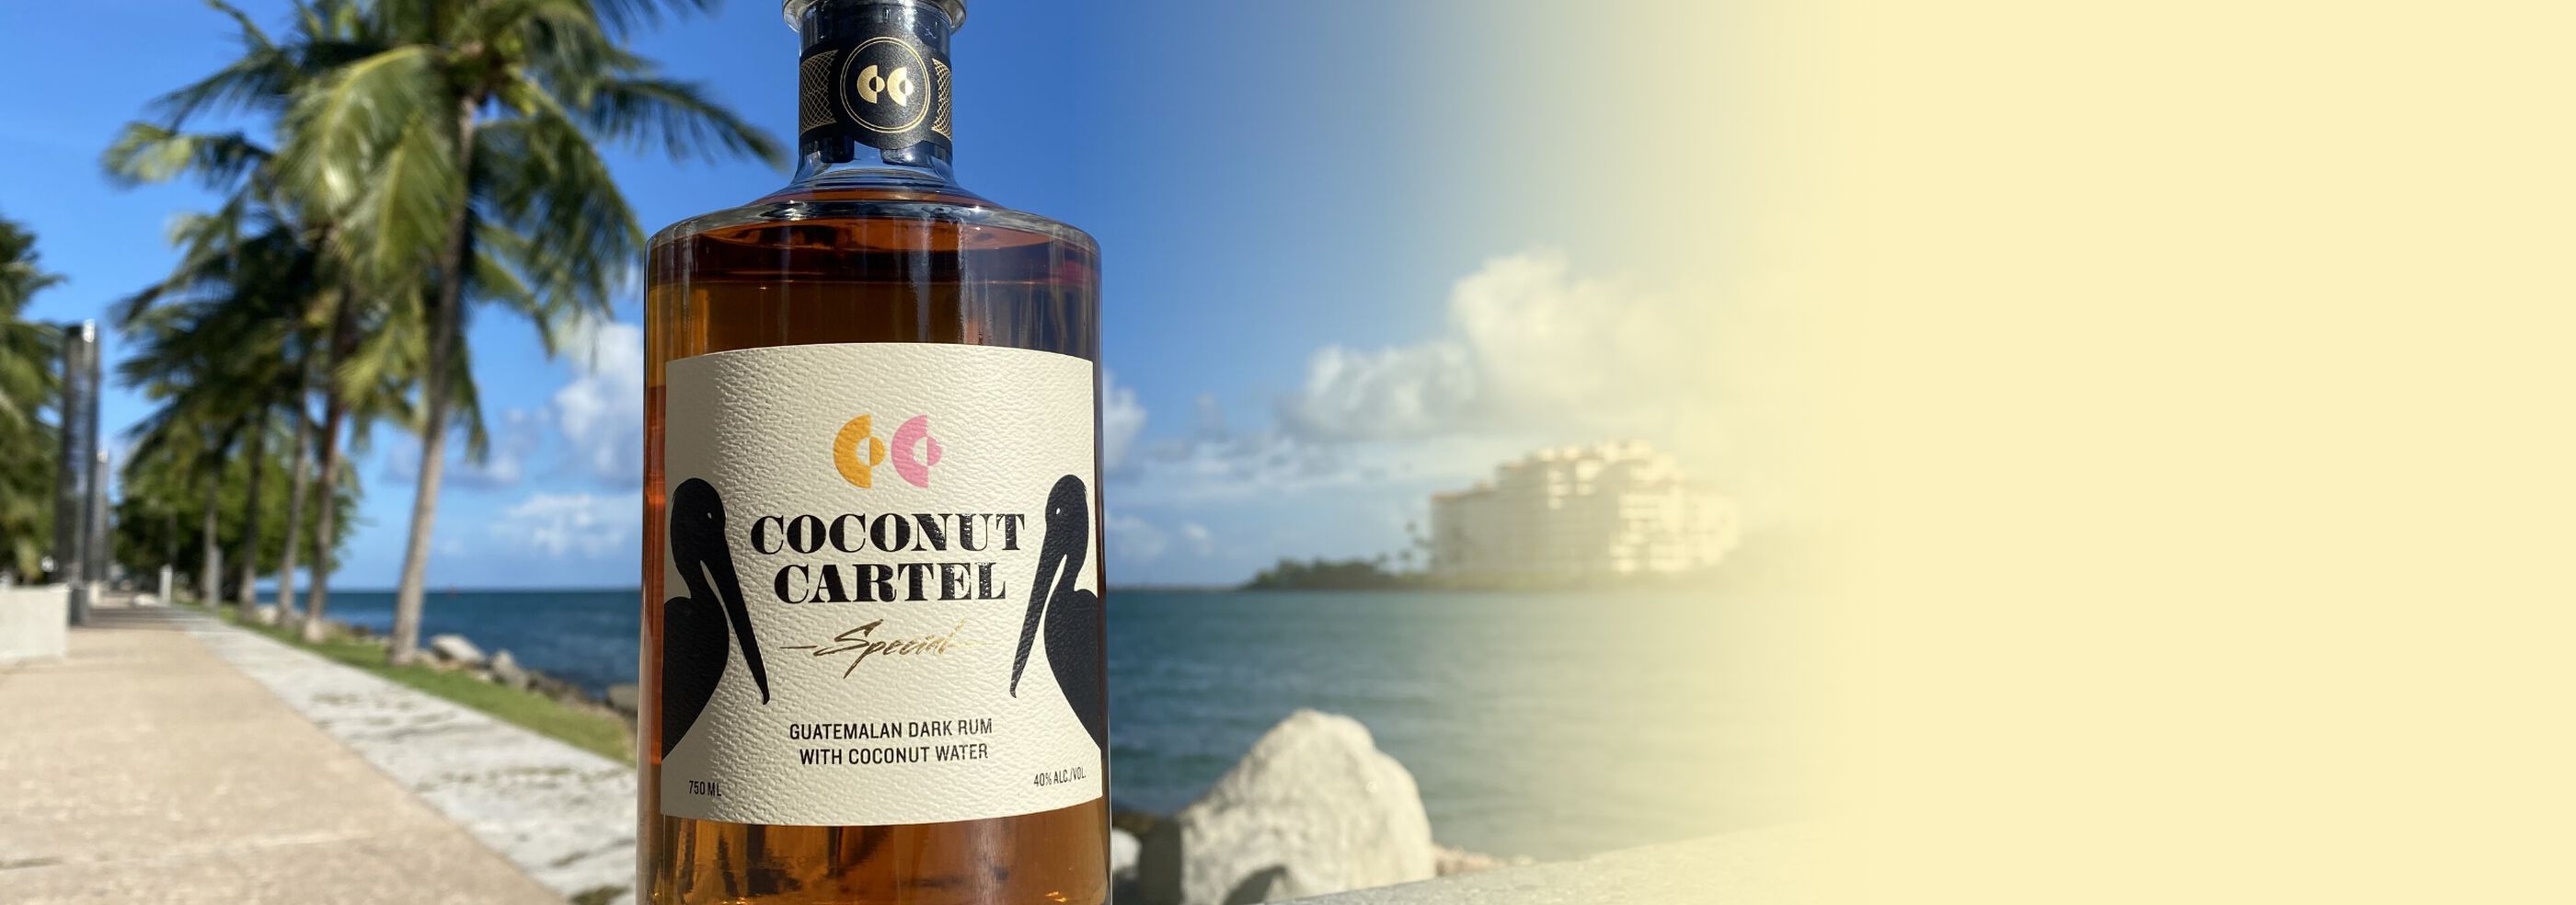 A bottle of Coconut Cartel Rum at the beach